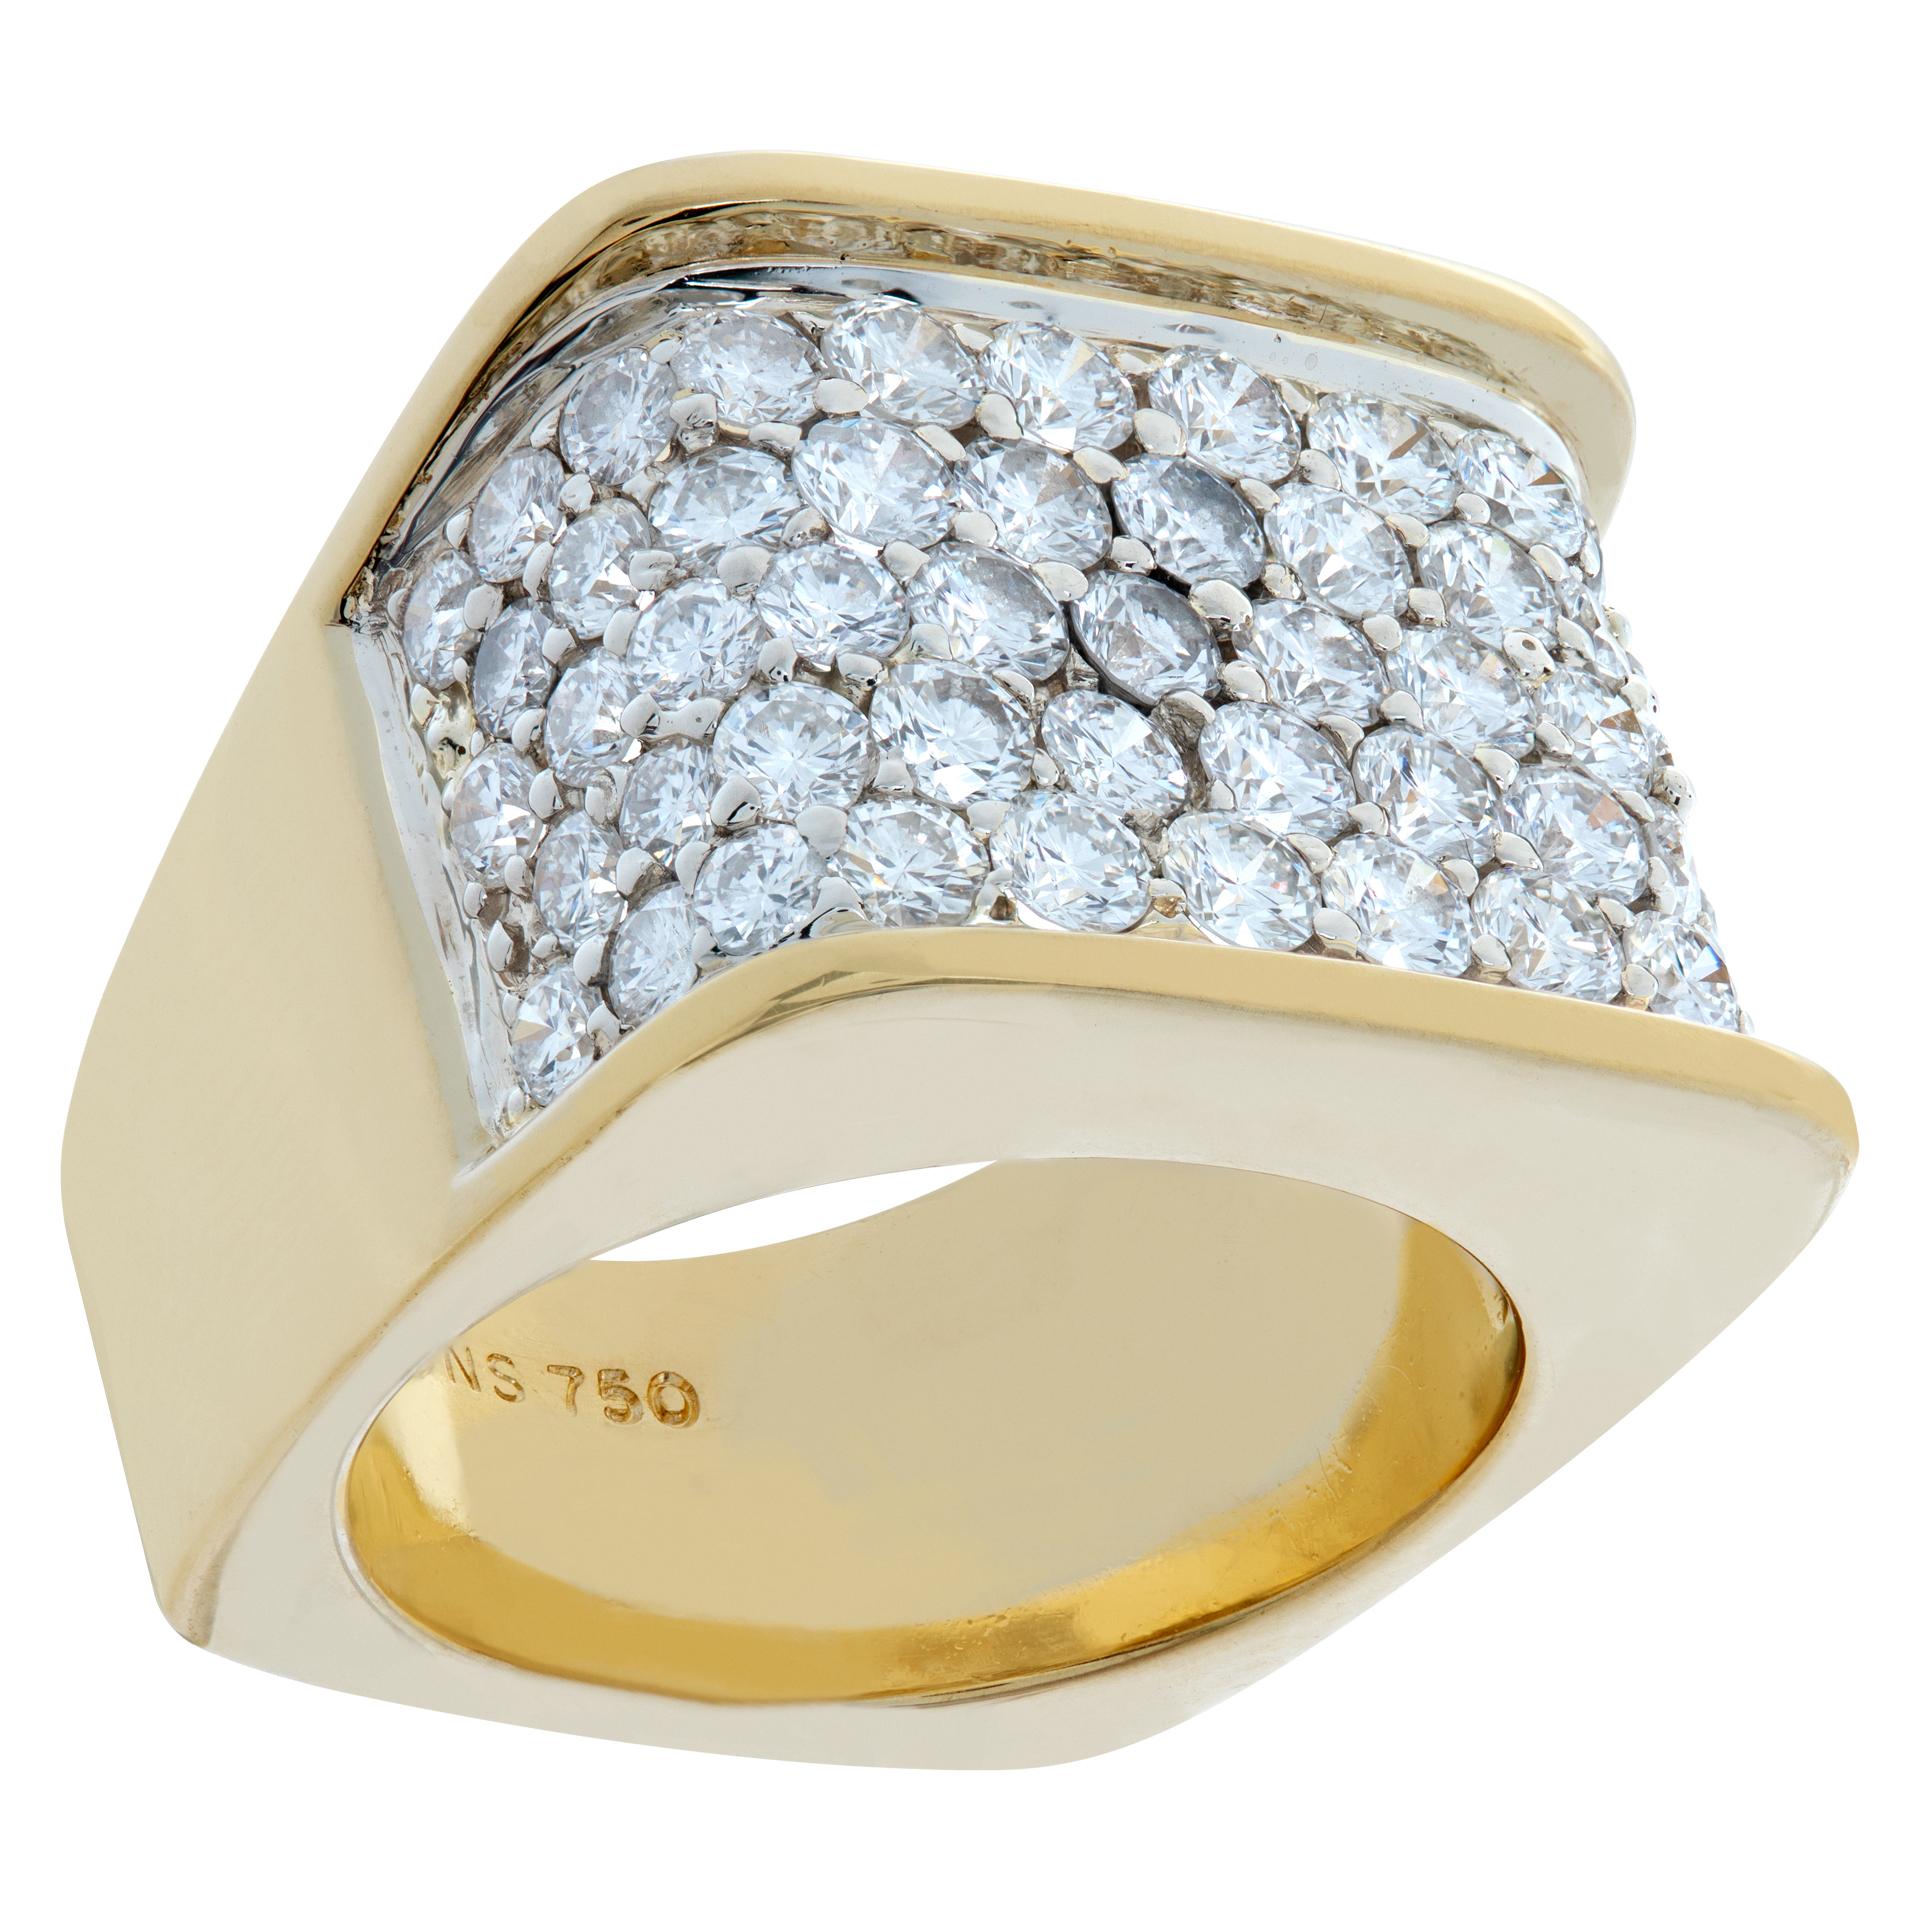 Pave diamond 18k yellow gold ring  In Excellent Condition For Sale In Surfside, FL